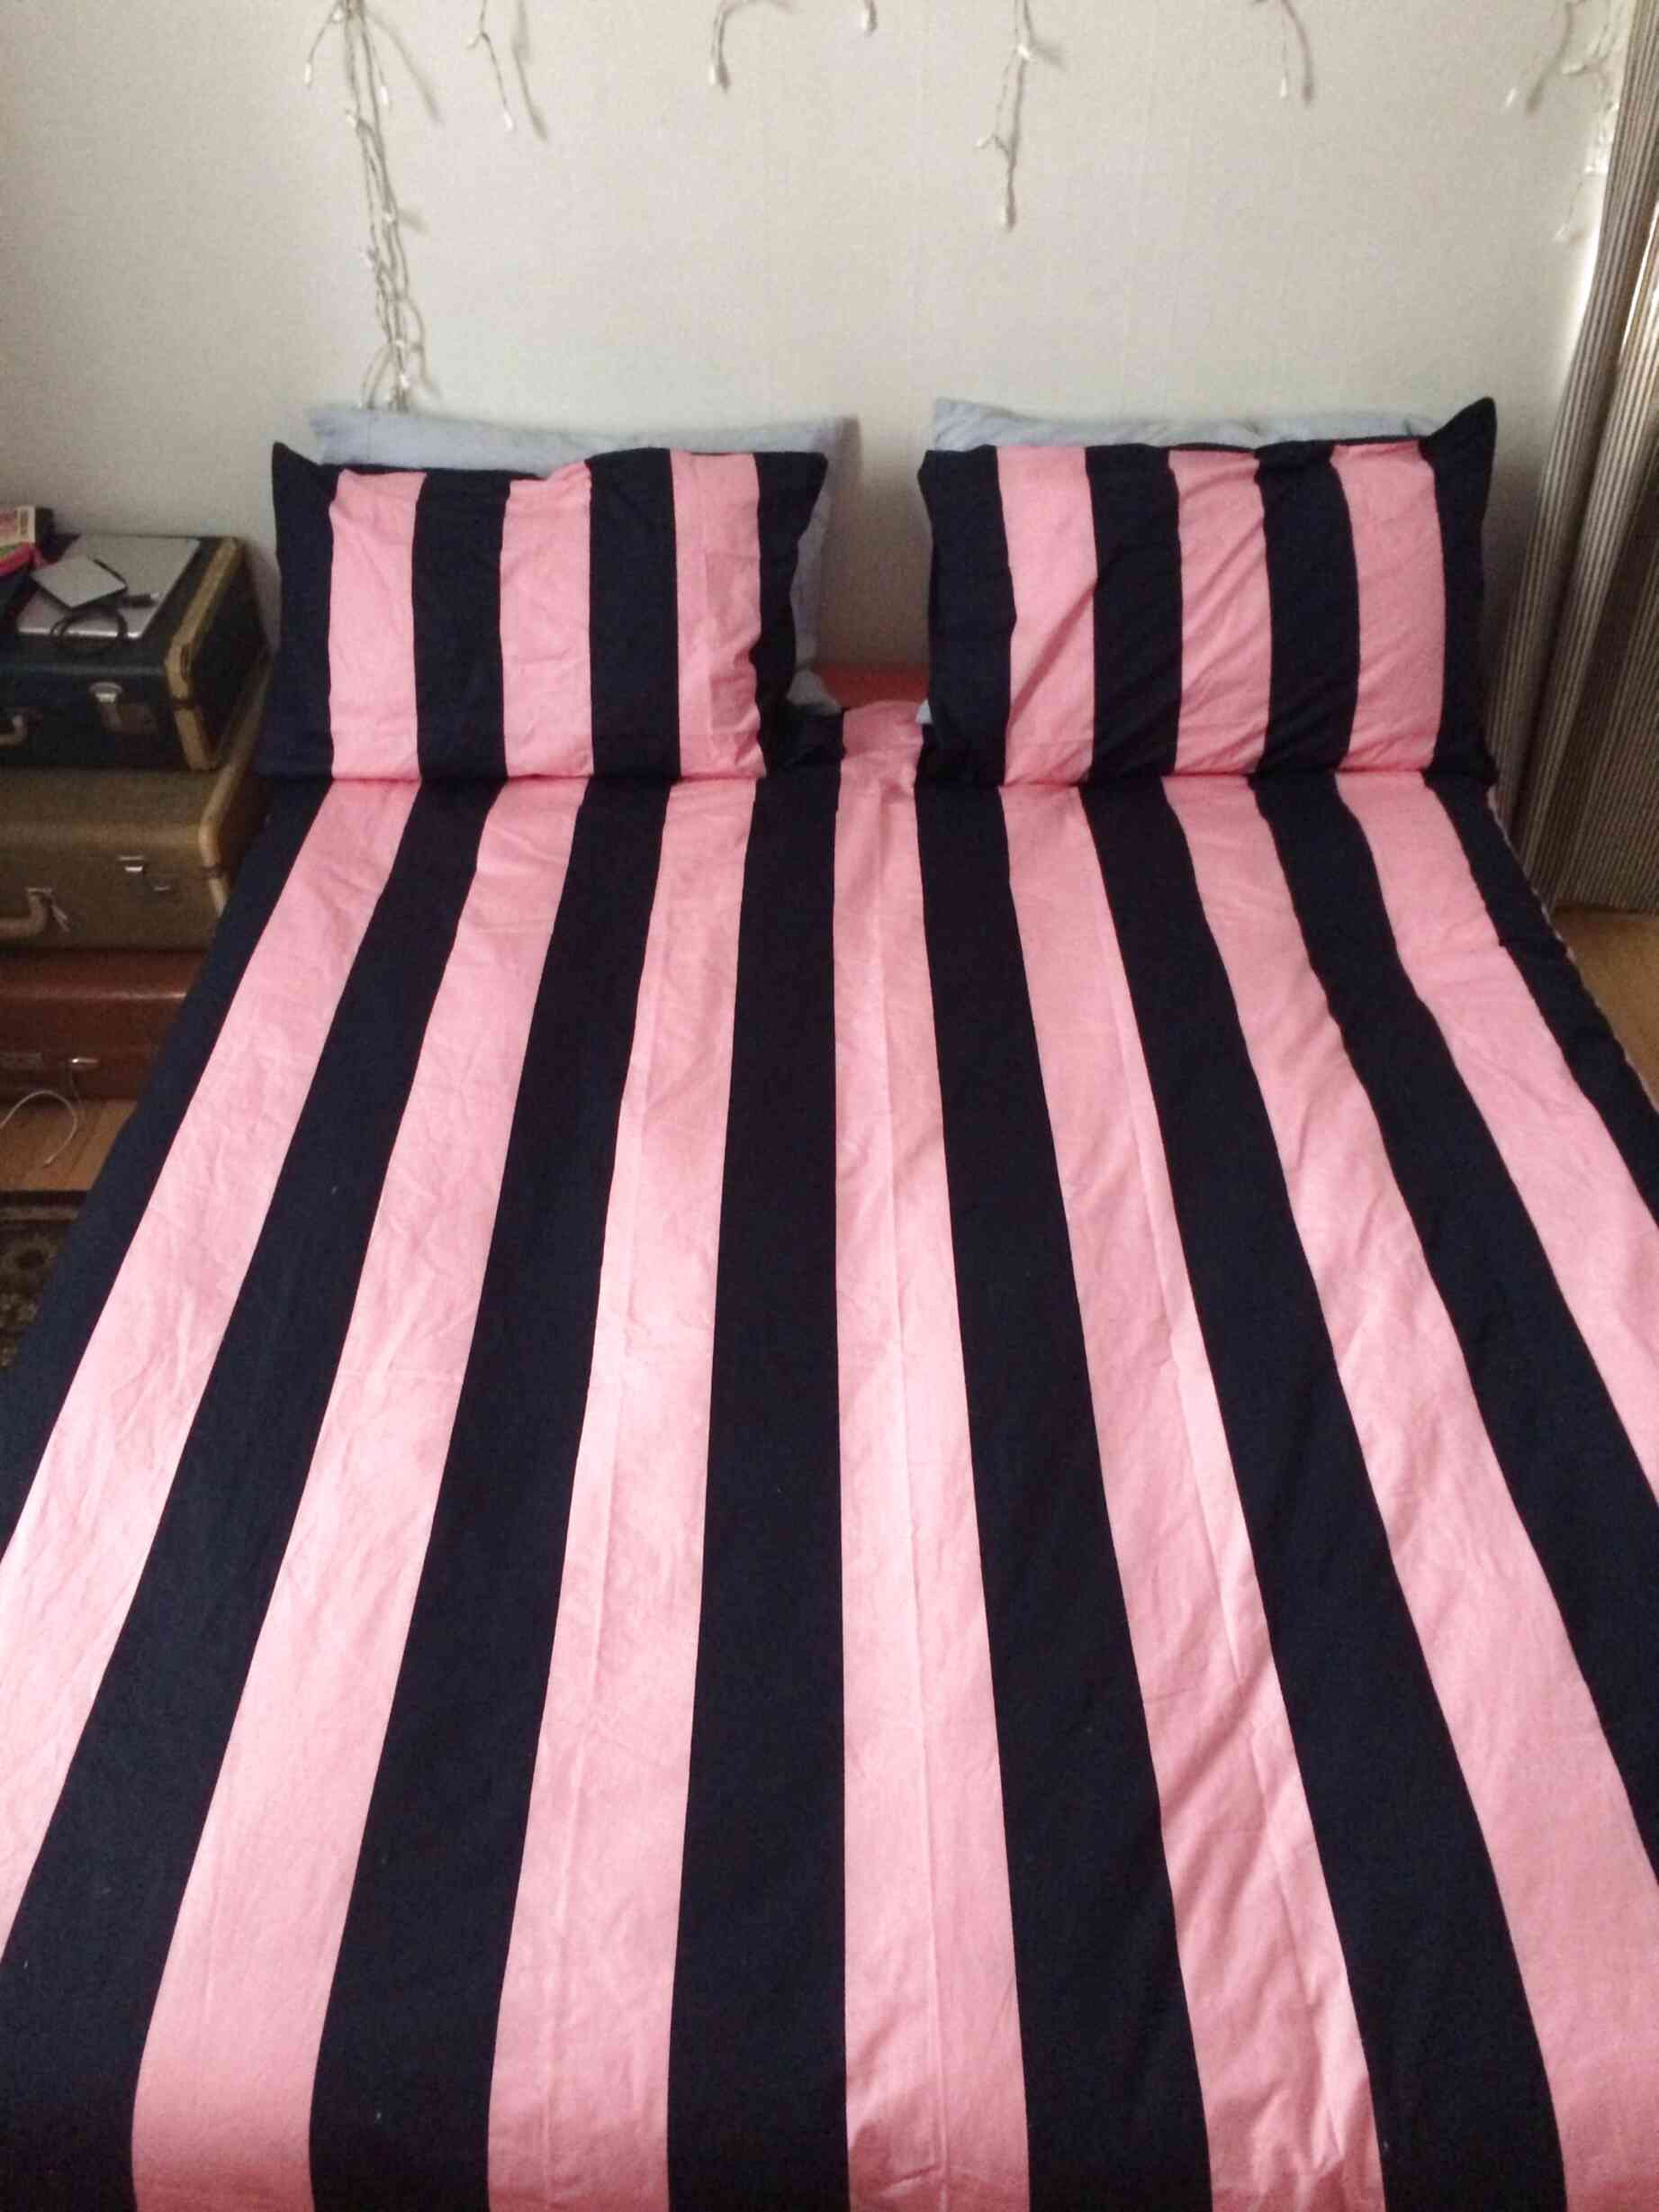 Jack Wills Bedding For Sale In Uk View 30 Bargains